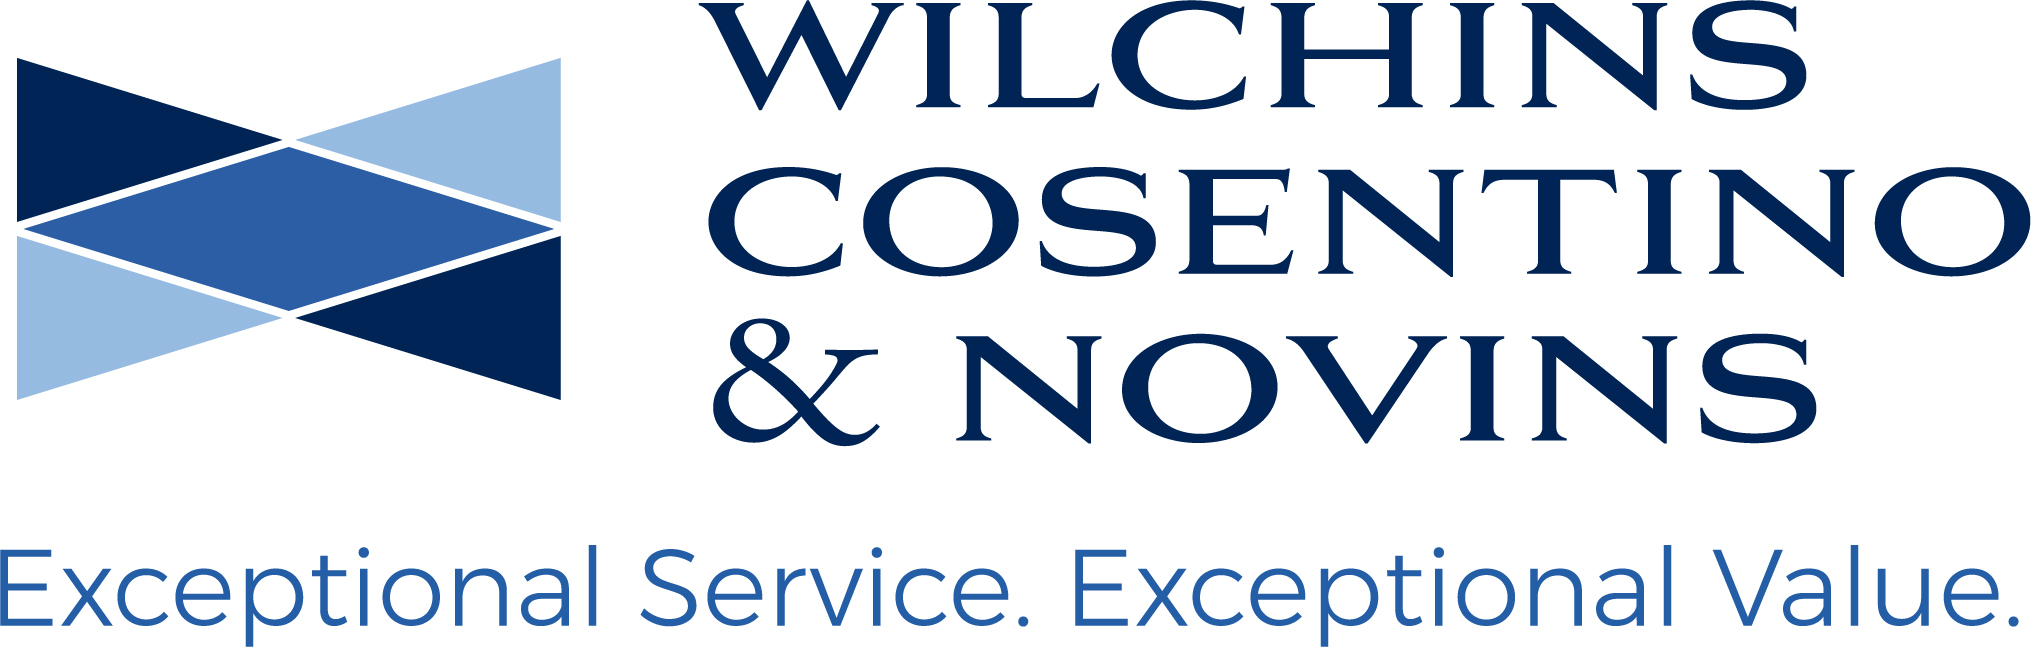 Wilchins Cosentino & Novins, LLC logo, names in blue with a grey line between each name